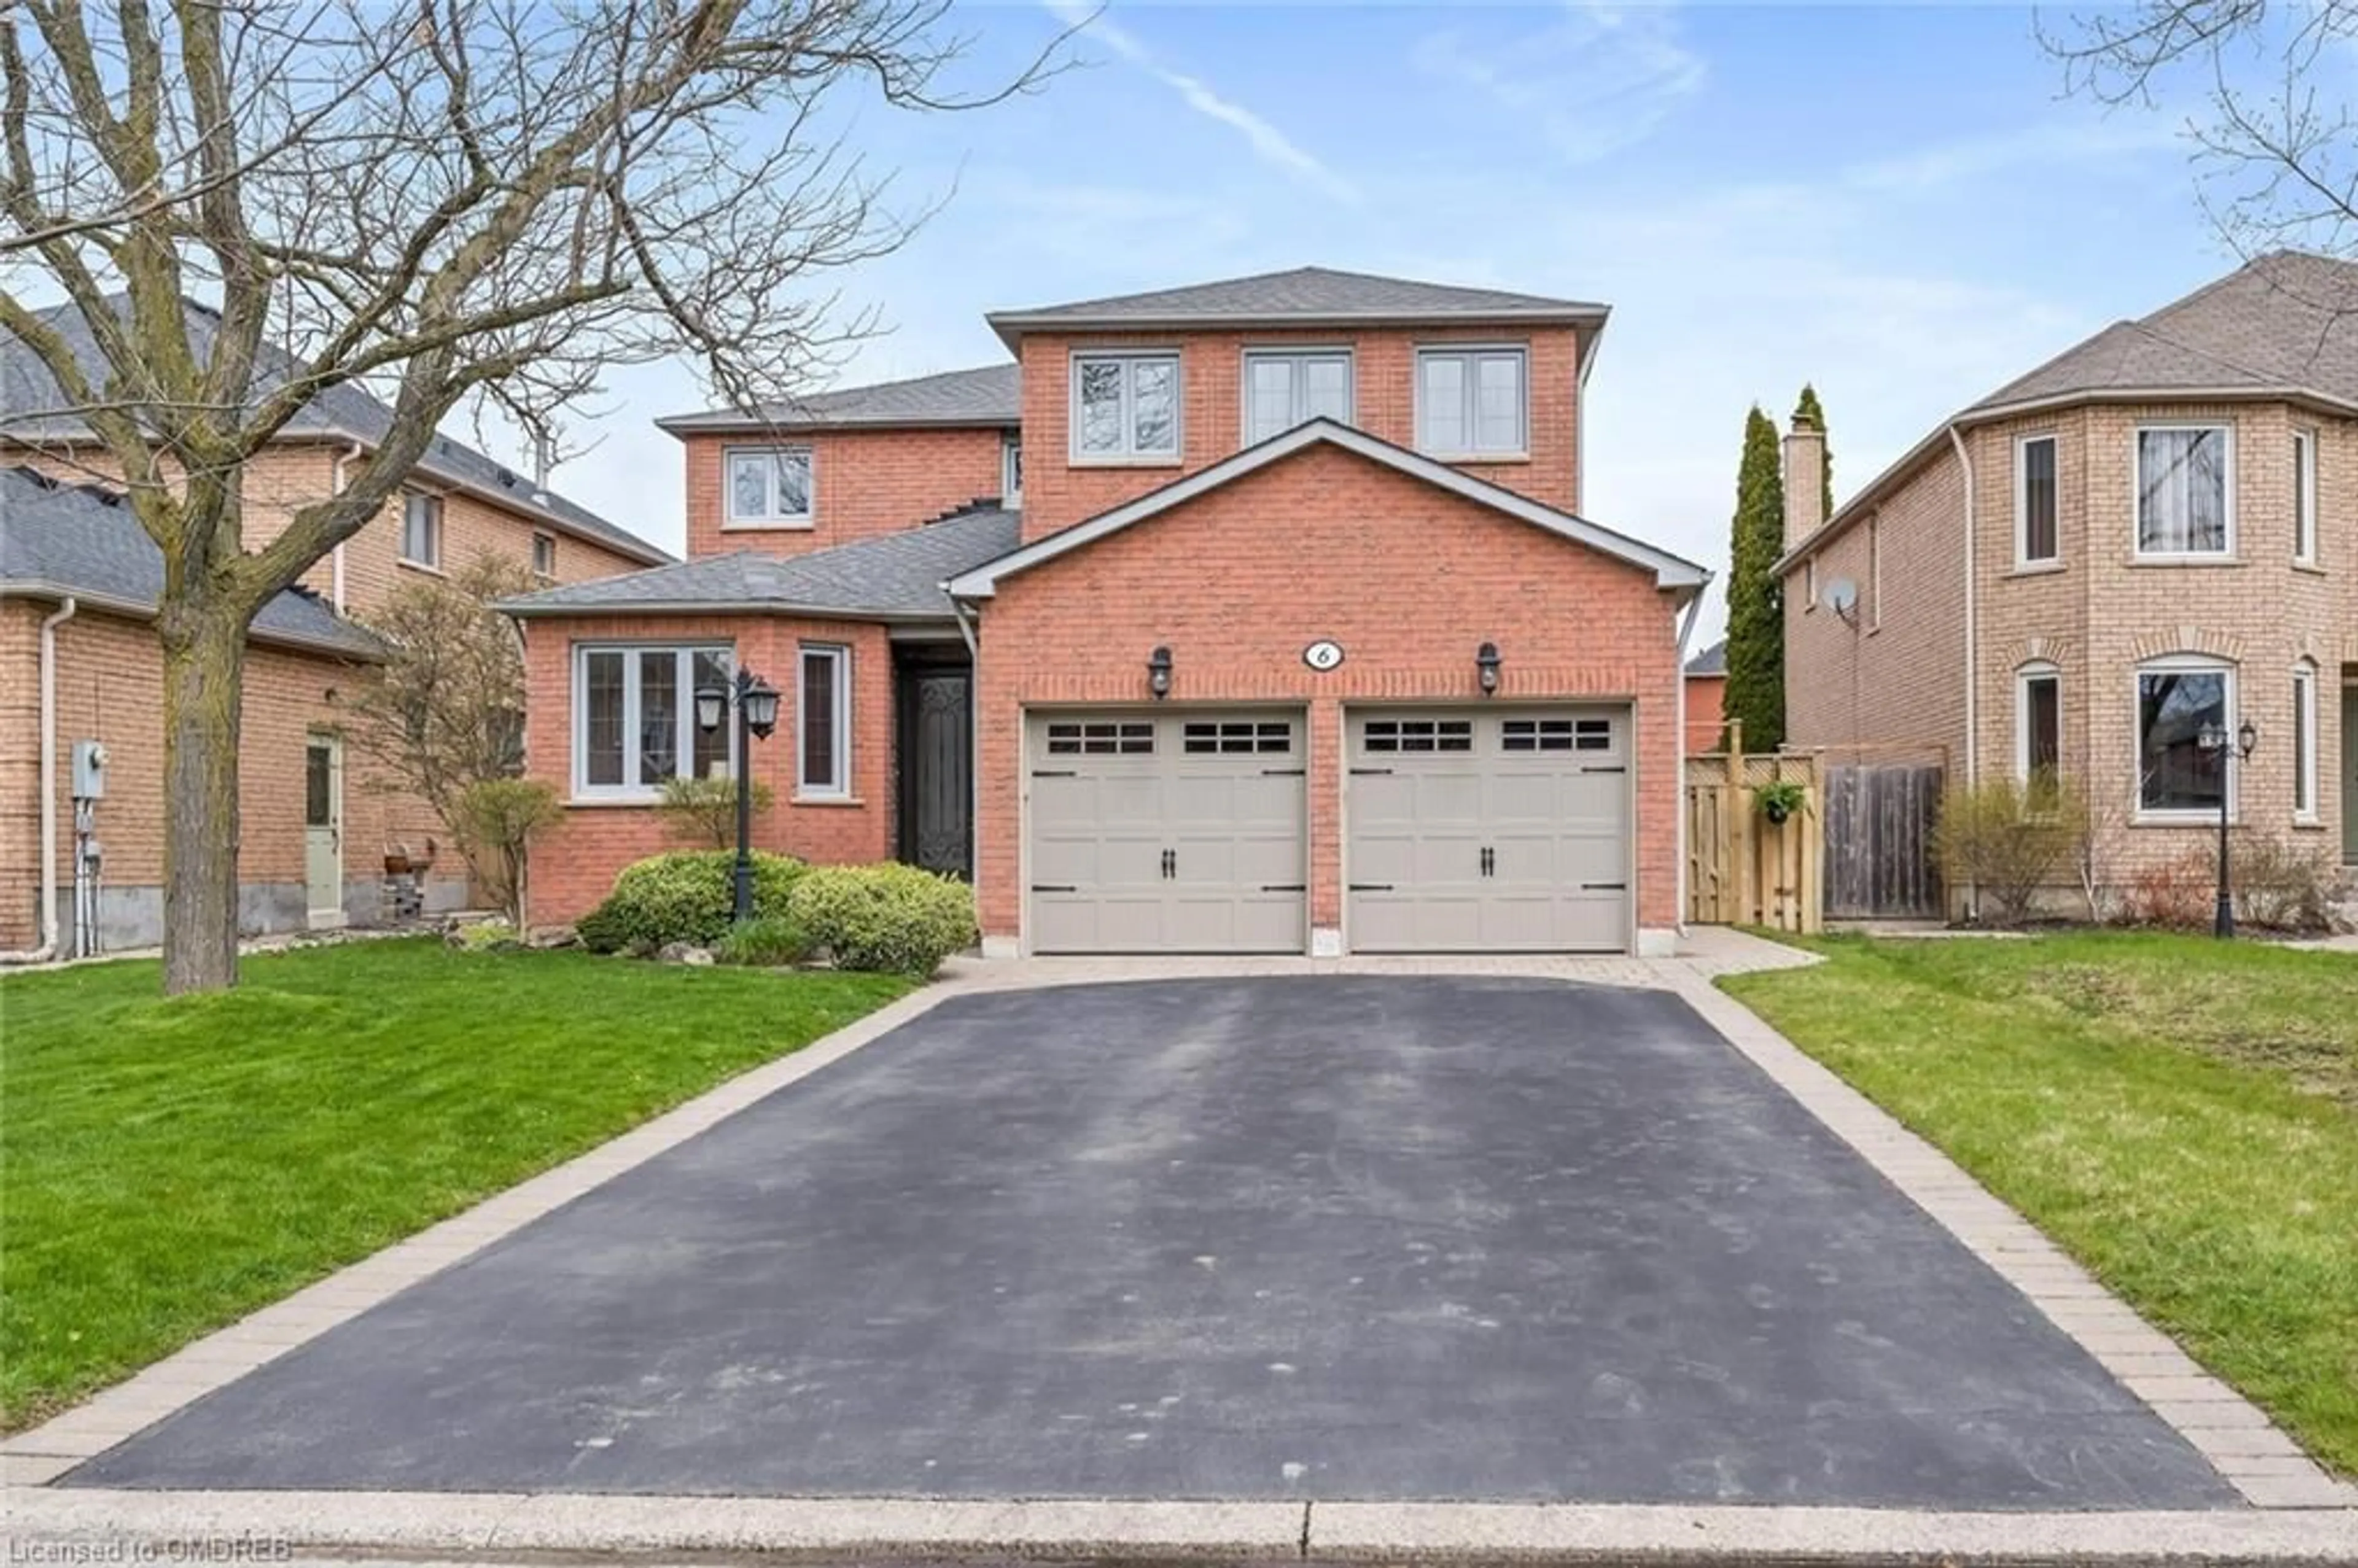 Home with brick exterior material for 6 Treanor Cres, Georgetown Ontario L7G 5J1